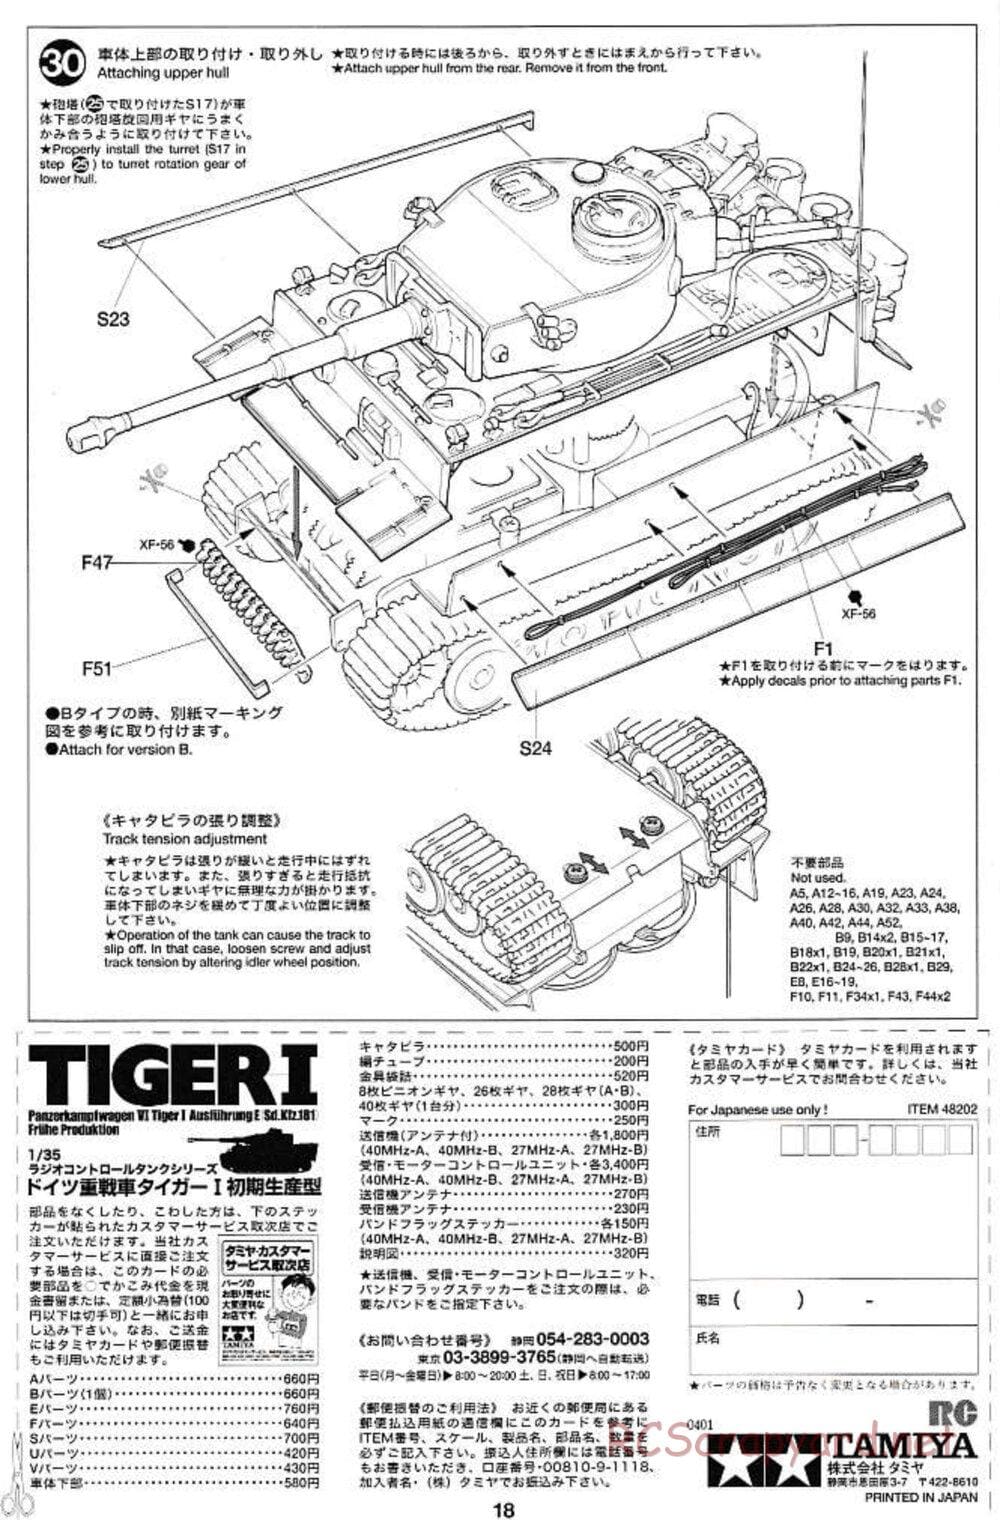 Tamiya - German Tiger 1 Early Production - 1/35 Scale Chassis - Manual - Page 18